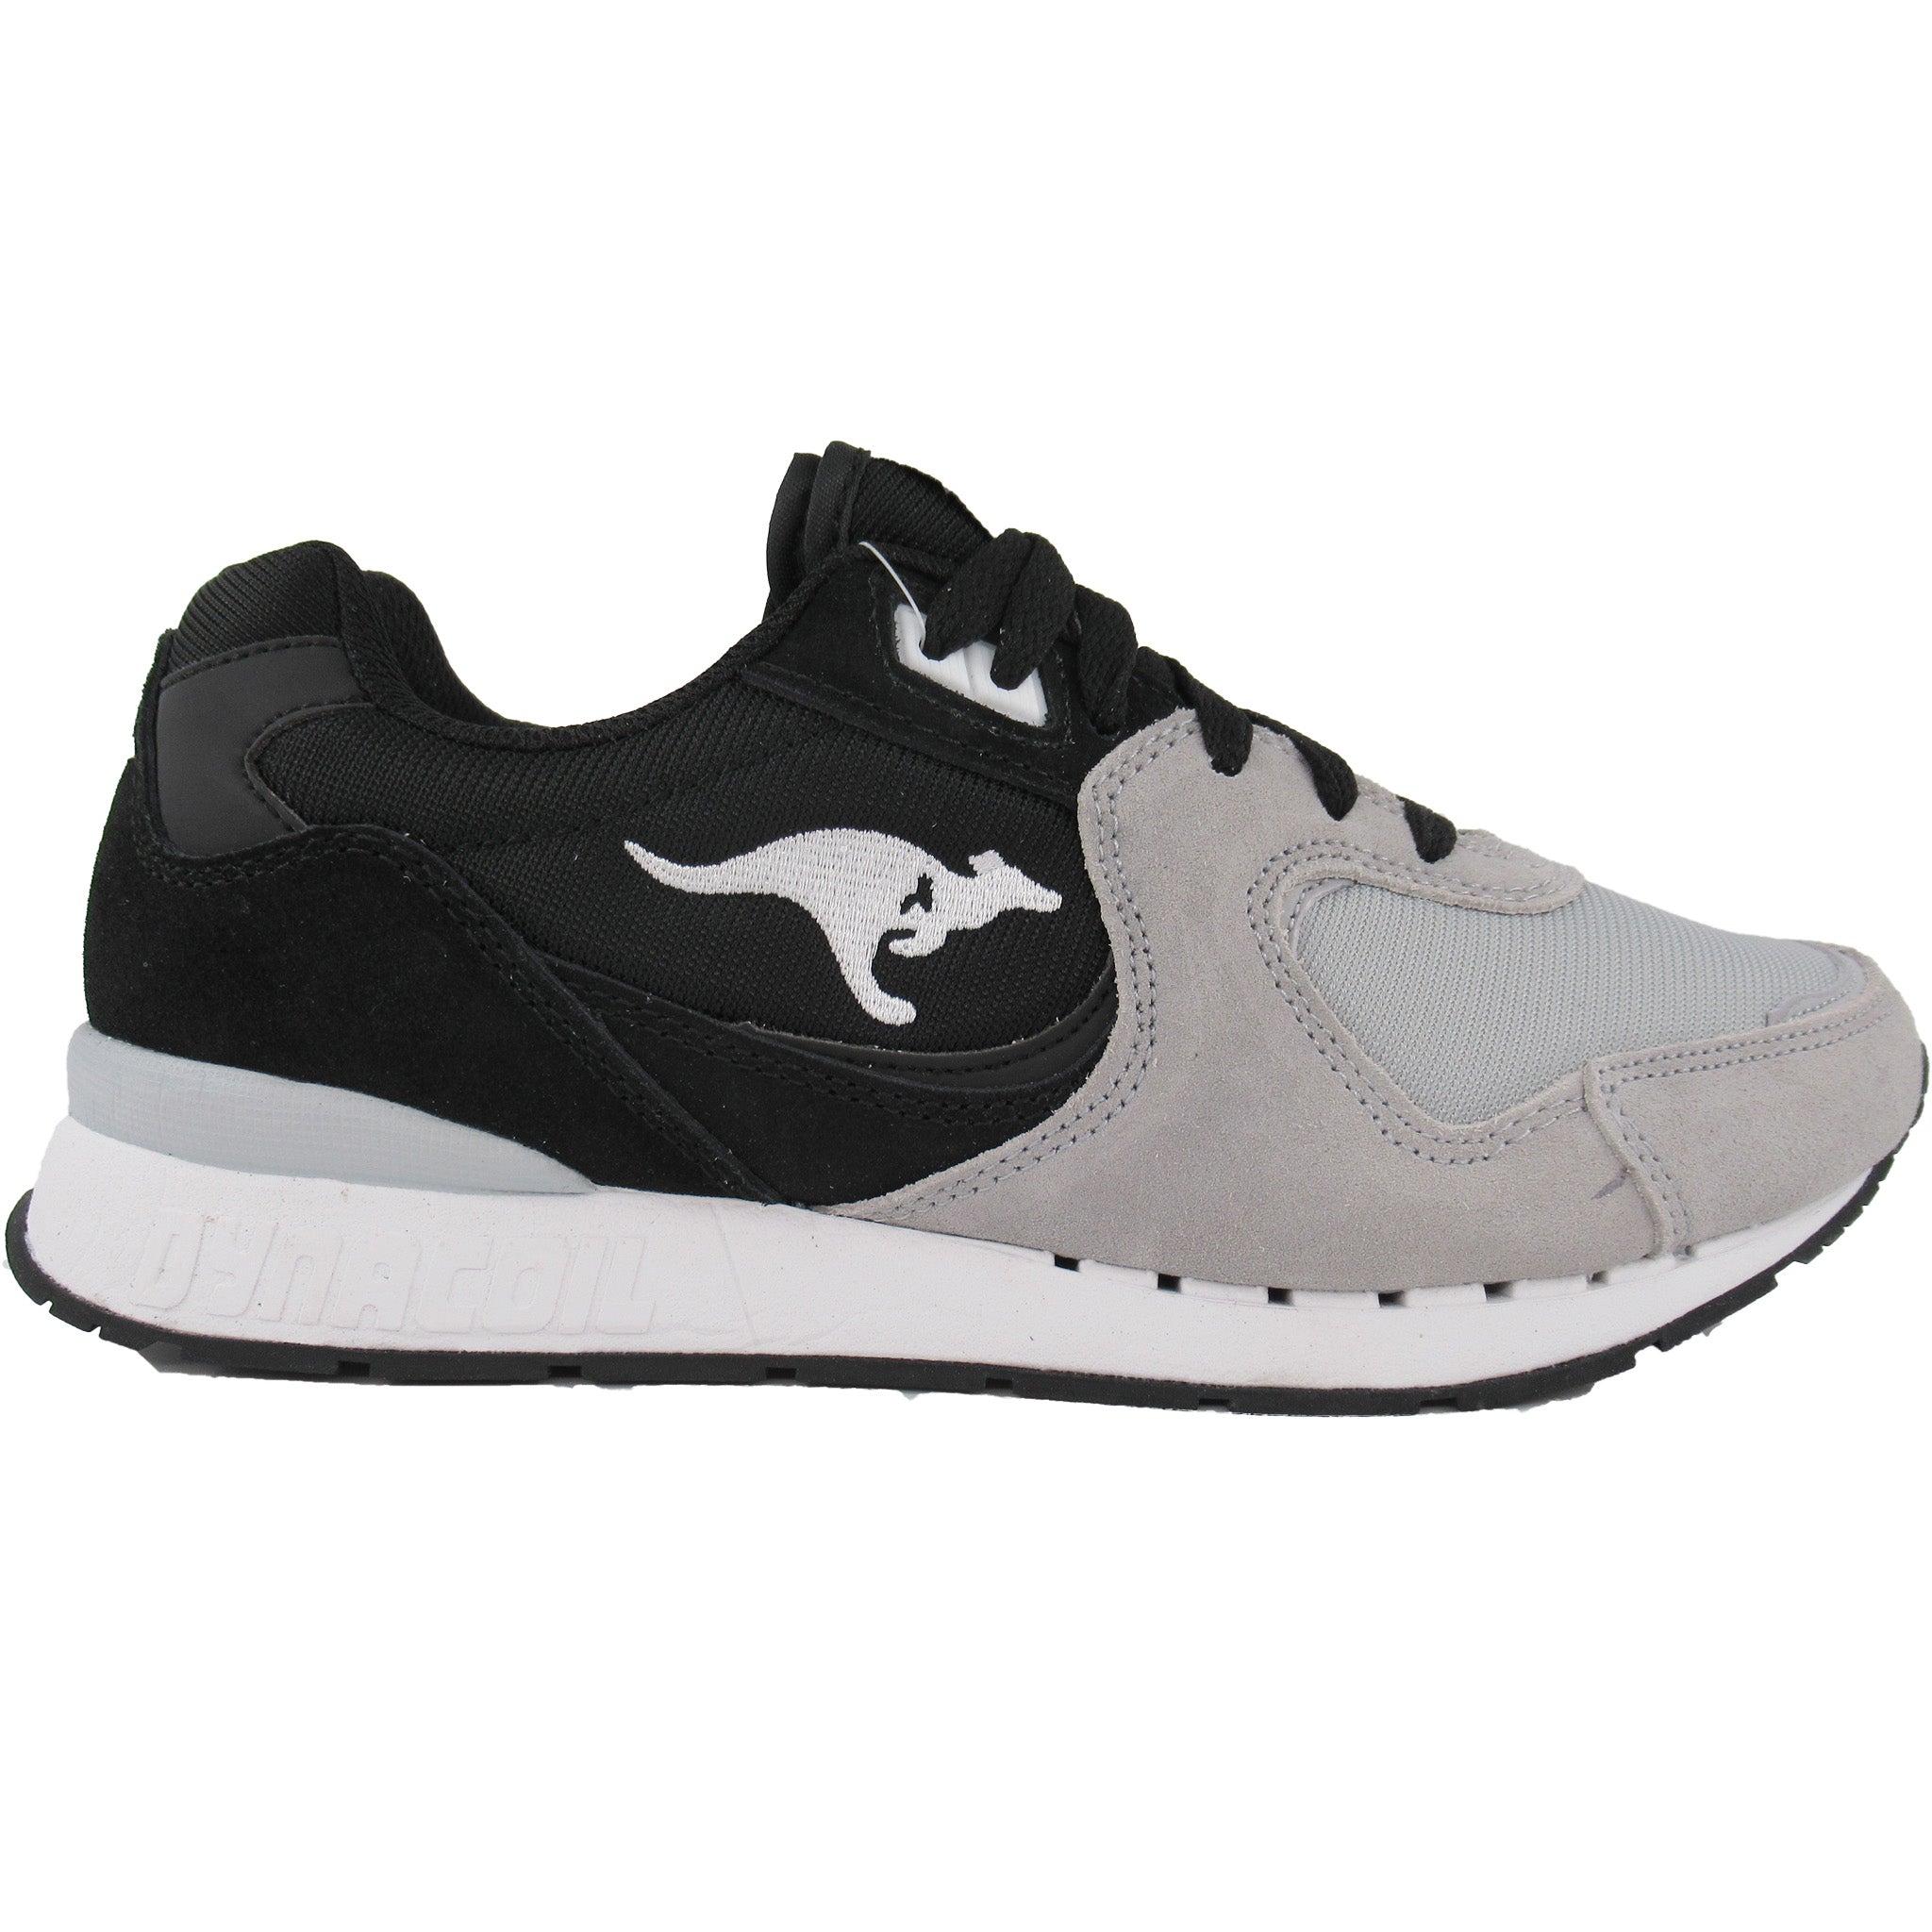 KangaROOS Mens R2 Casual Classic Athletic Shoes – That Shoe Store and More